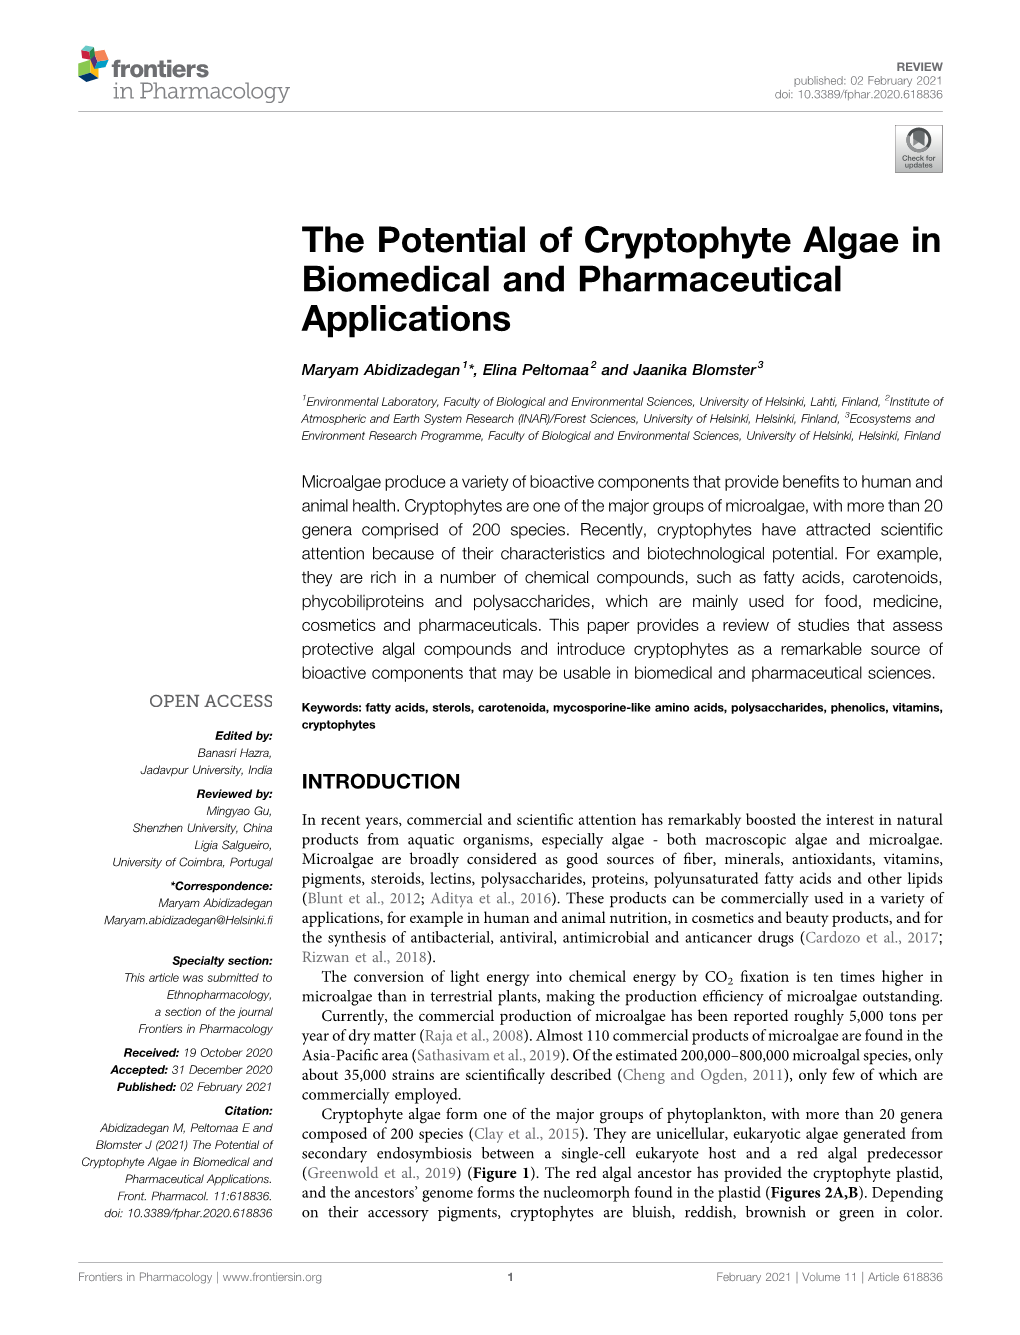 The Potential of Cryptophyte Algae in Biomedical and Pharmaceutical Applications